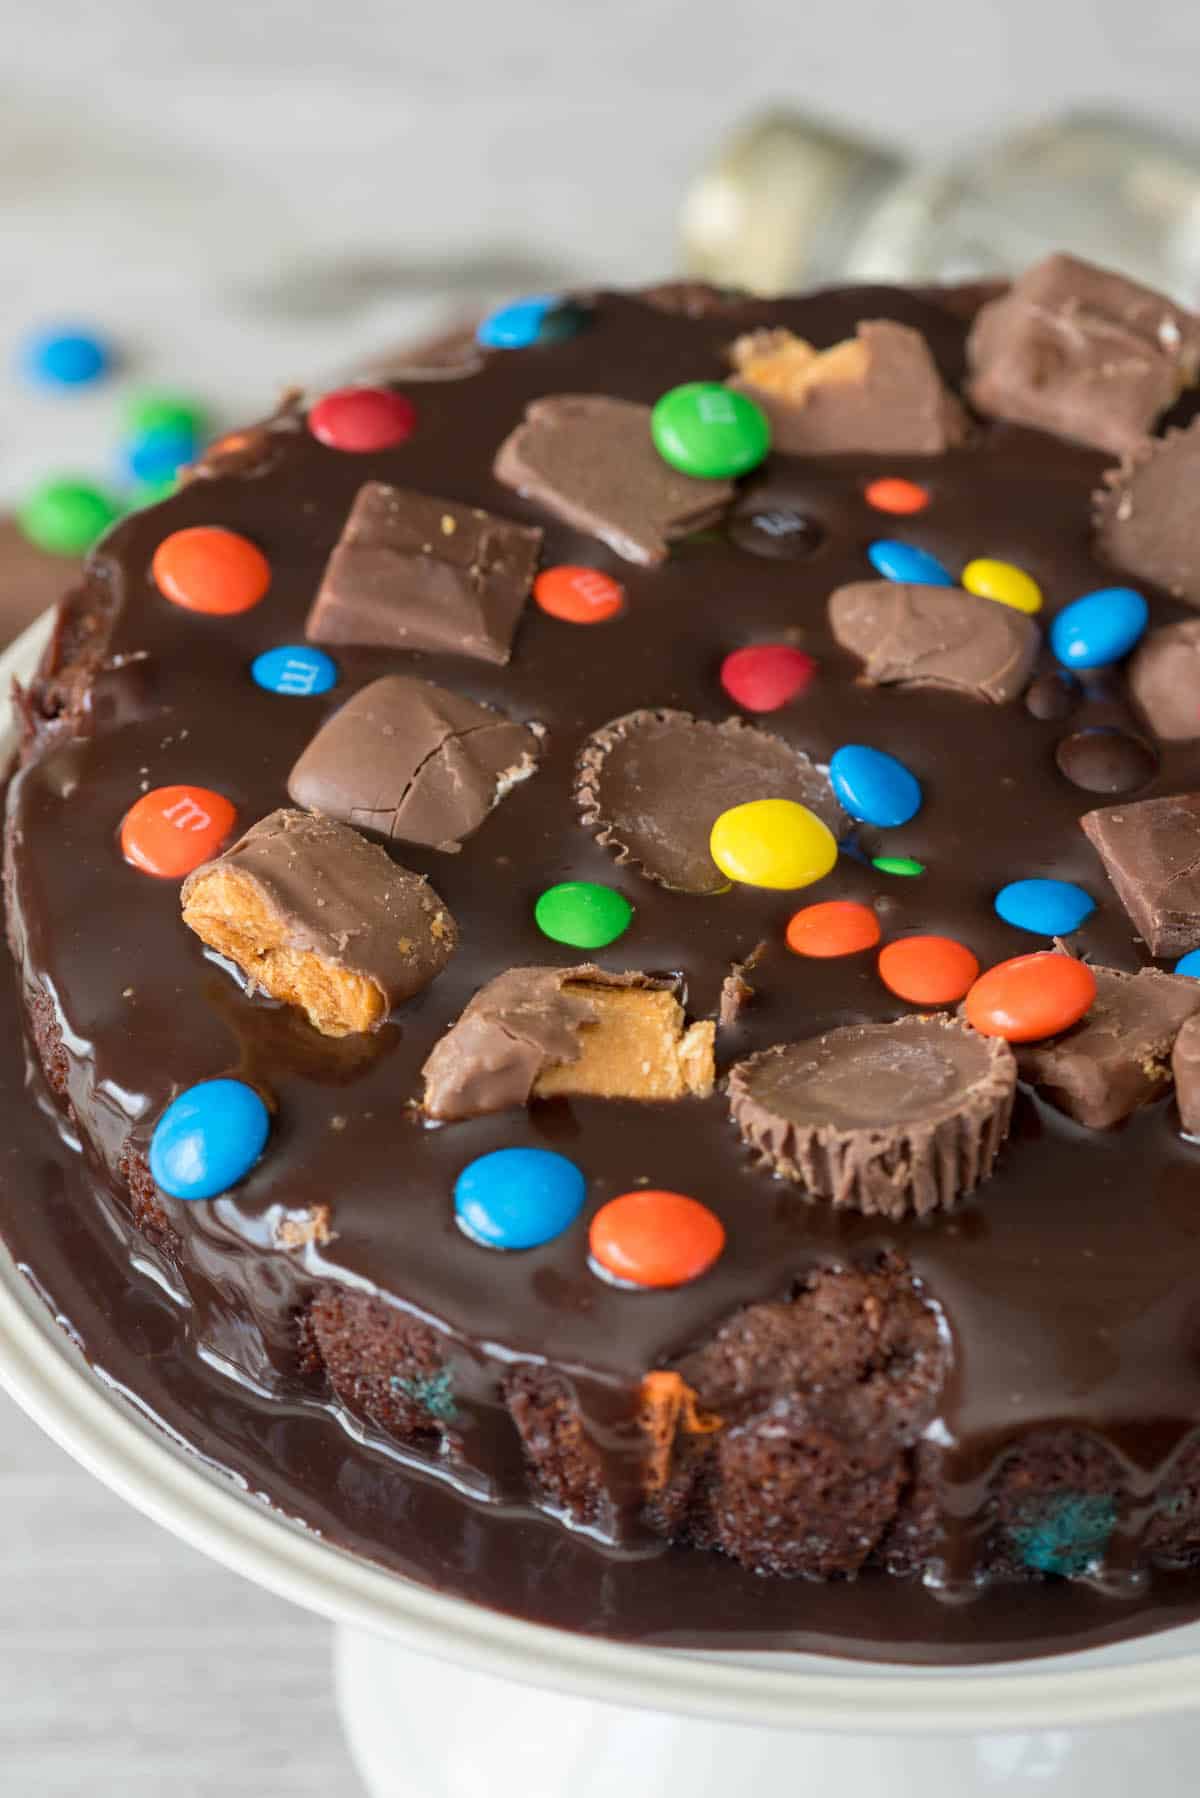 cake with m&ms and peanut butter cups baked in on top sitting on a white platter